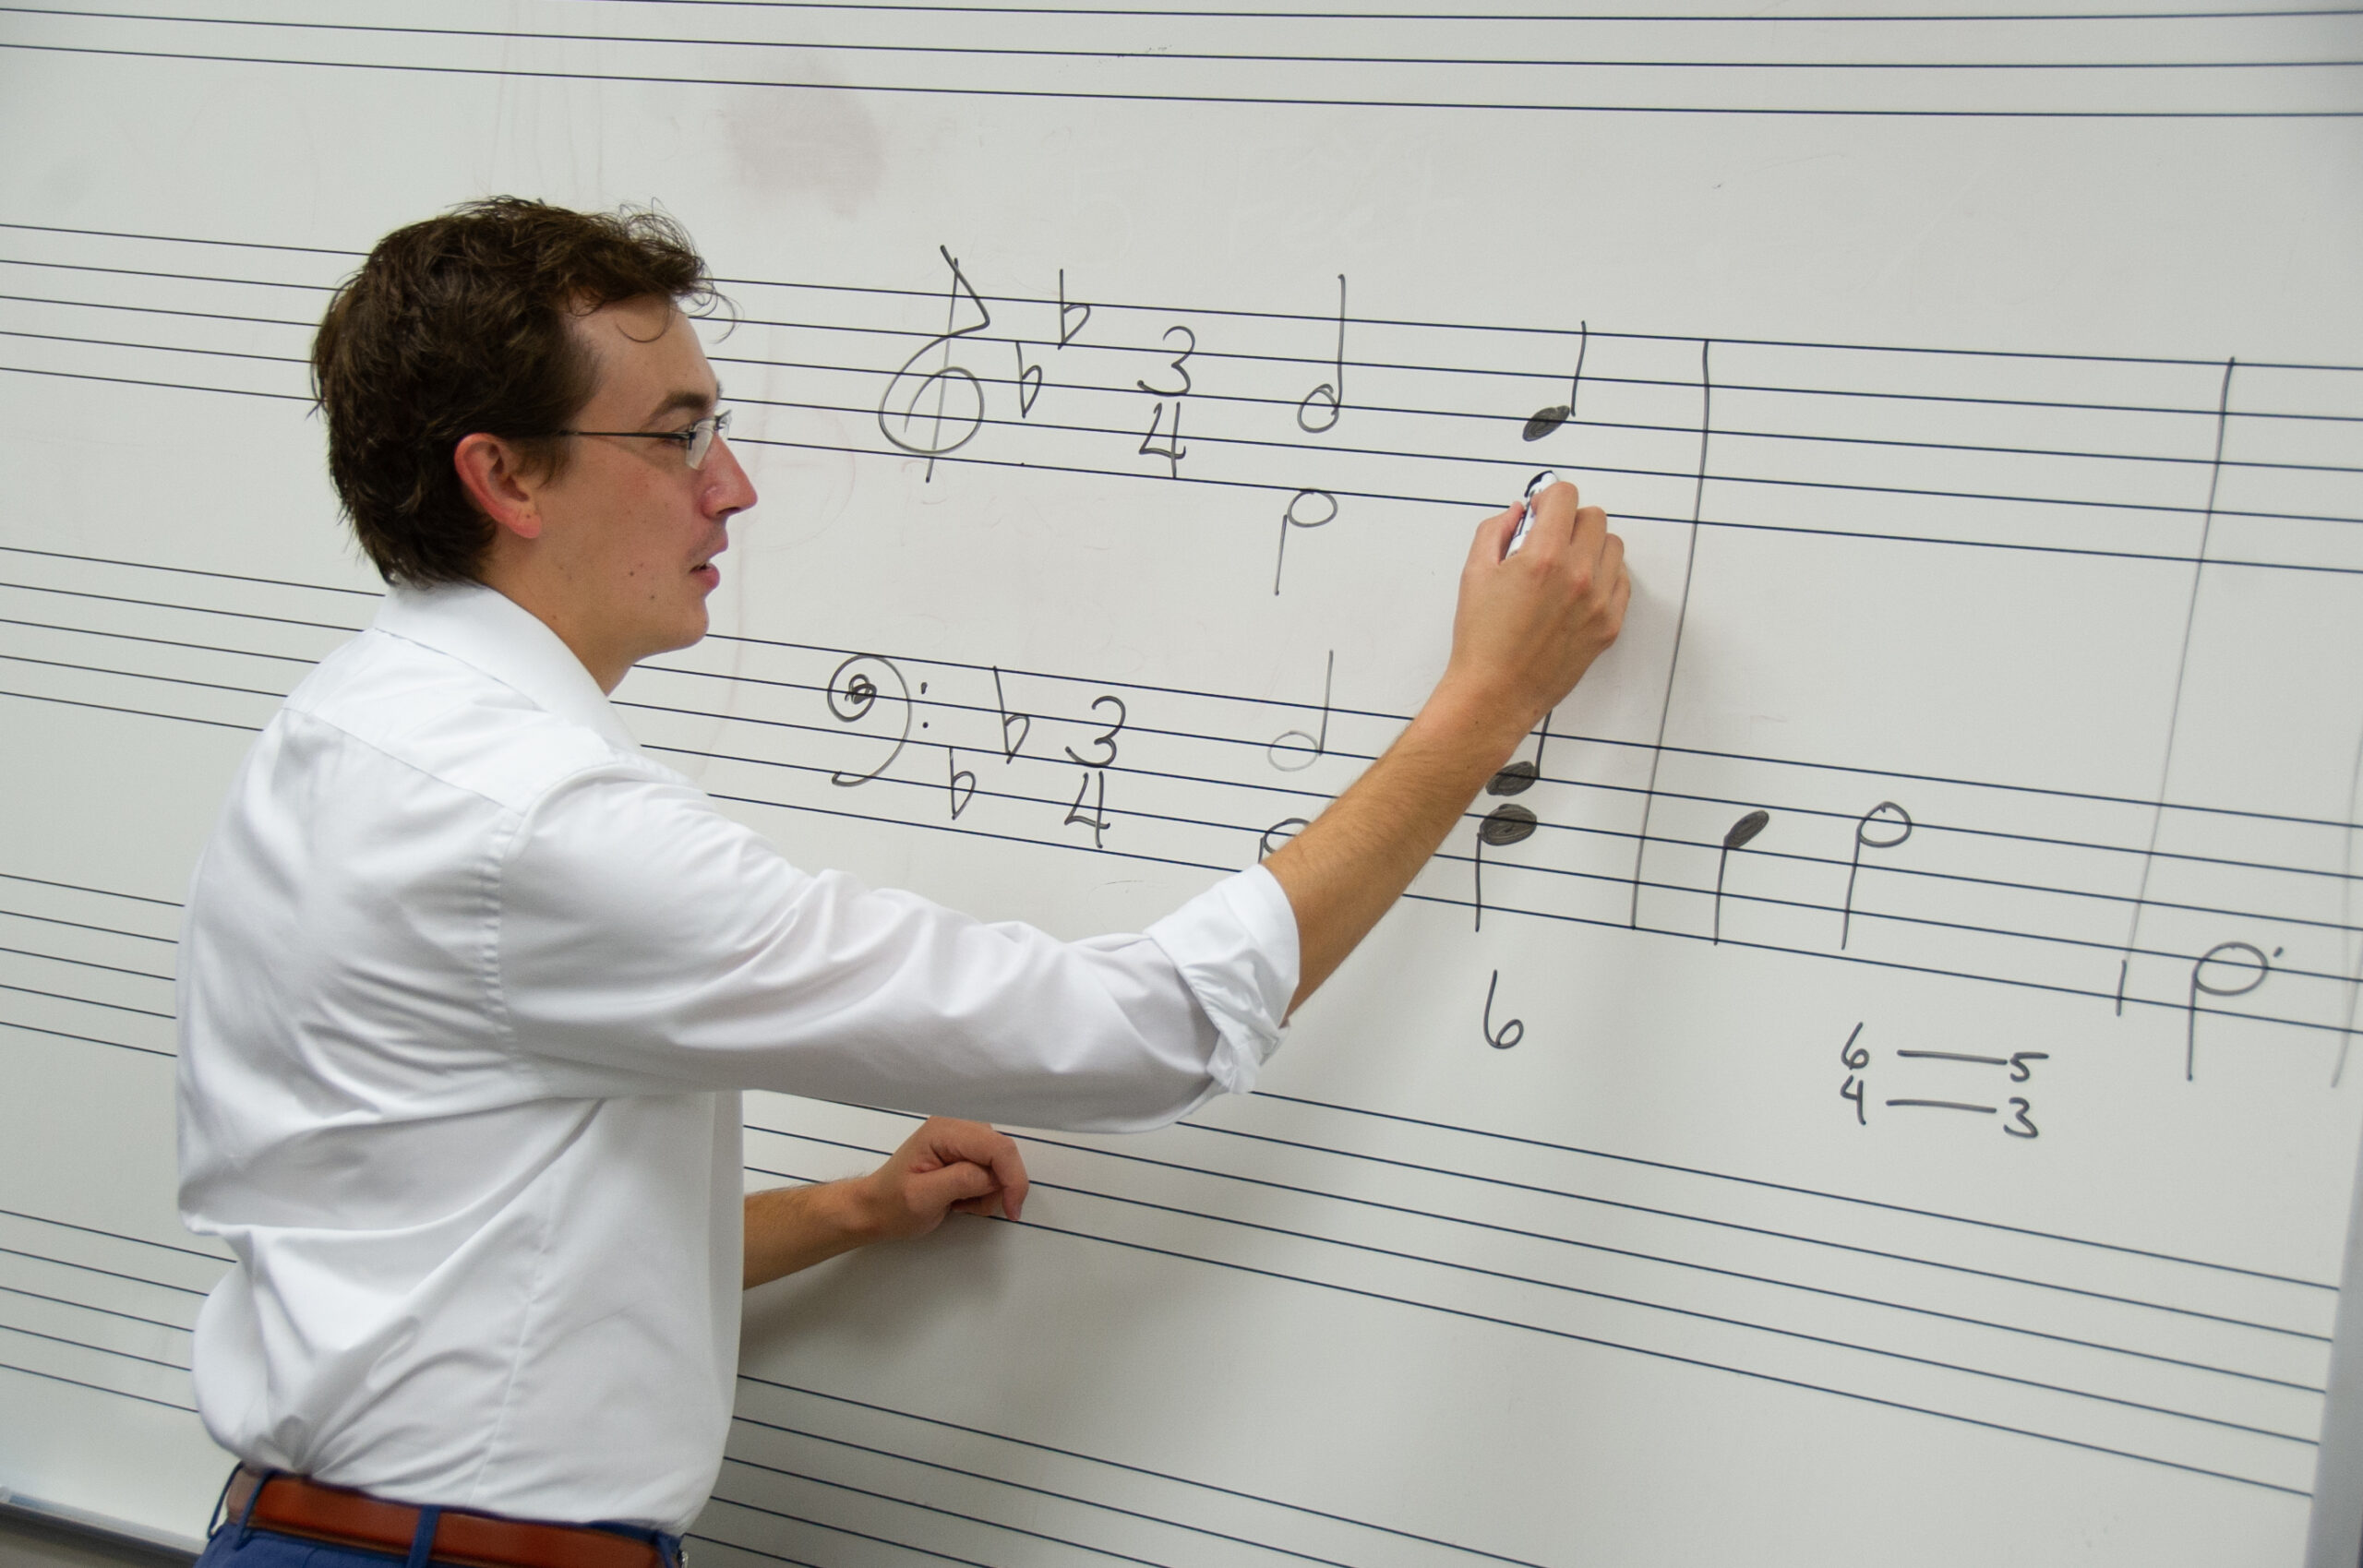 Blackburn's Music professor, Joseph Welch. drawing musical notes on a whiteboard.